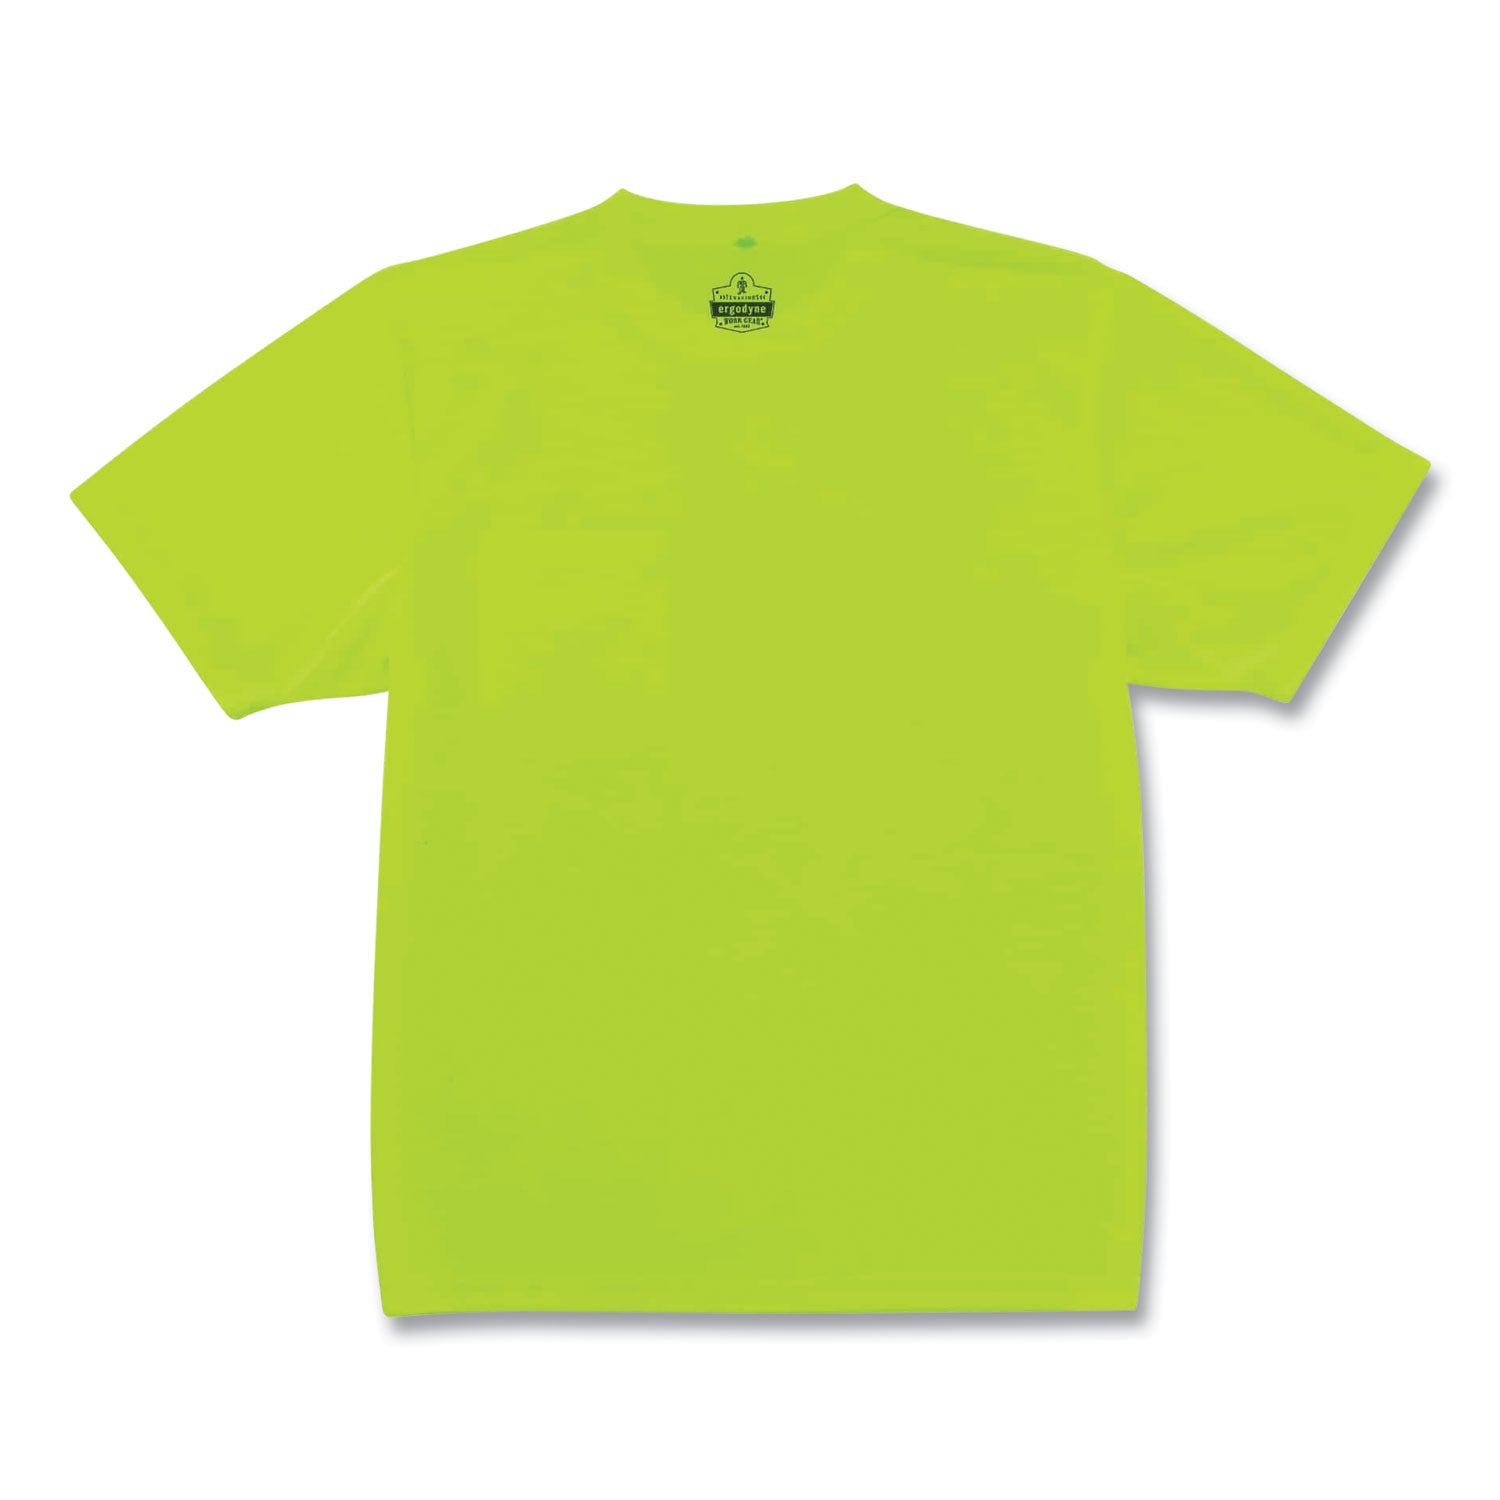 glowear-8089-non-certified-hi-vis-t-shirt-polyester-3x-large-lime-ships-in-1-3-business-days_ego21557 - 3